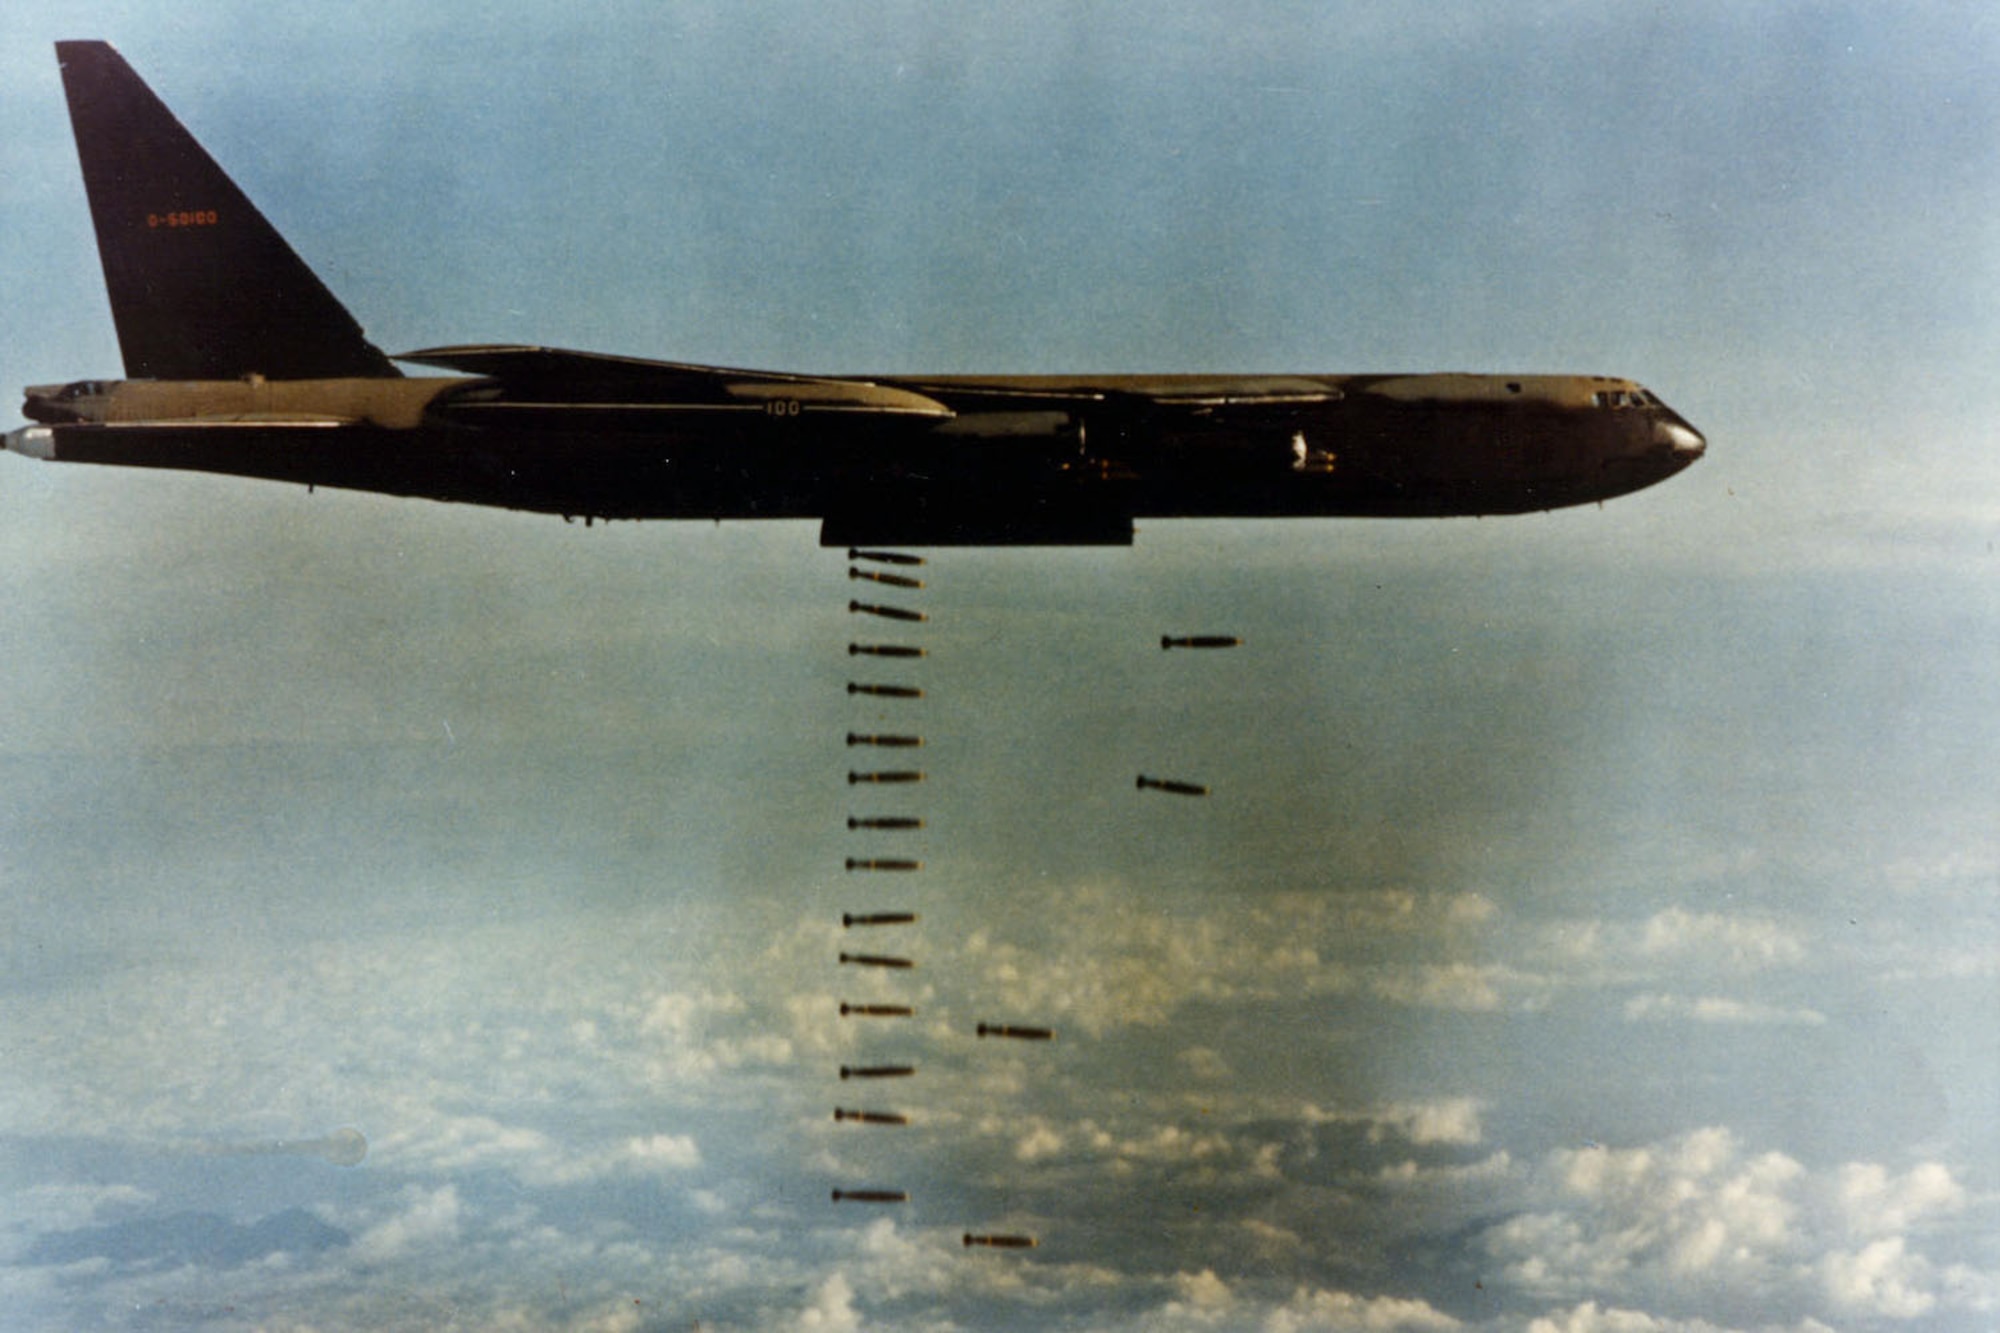 One of the “Big Belly” B-52Ds releasing its 60,000-pound bomb load of bombs on enemy targets in Vietnam. It could carry up to 84 500-pound bombs or 42 750-pound bombs internally and 24 750-pound bombs externally on racks under the wings. (U.S. Air Force photo)